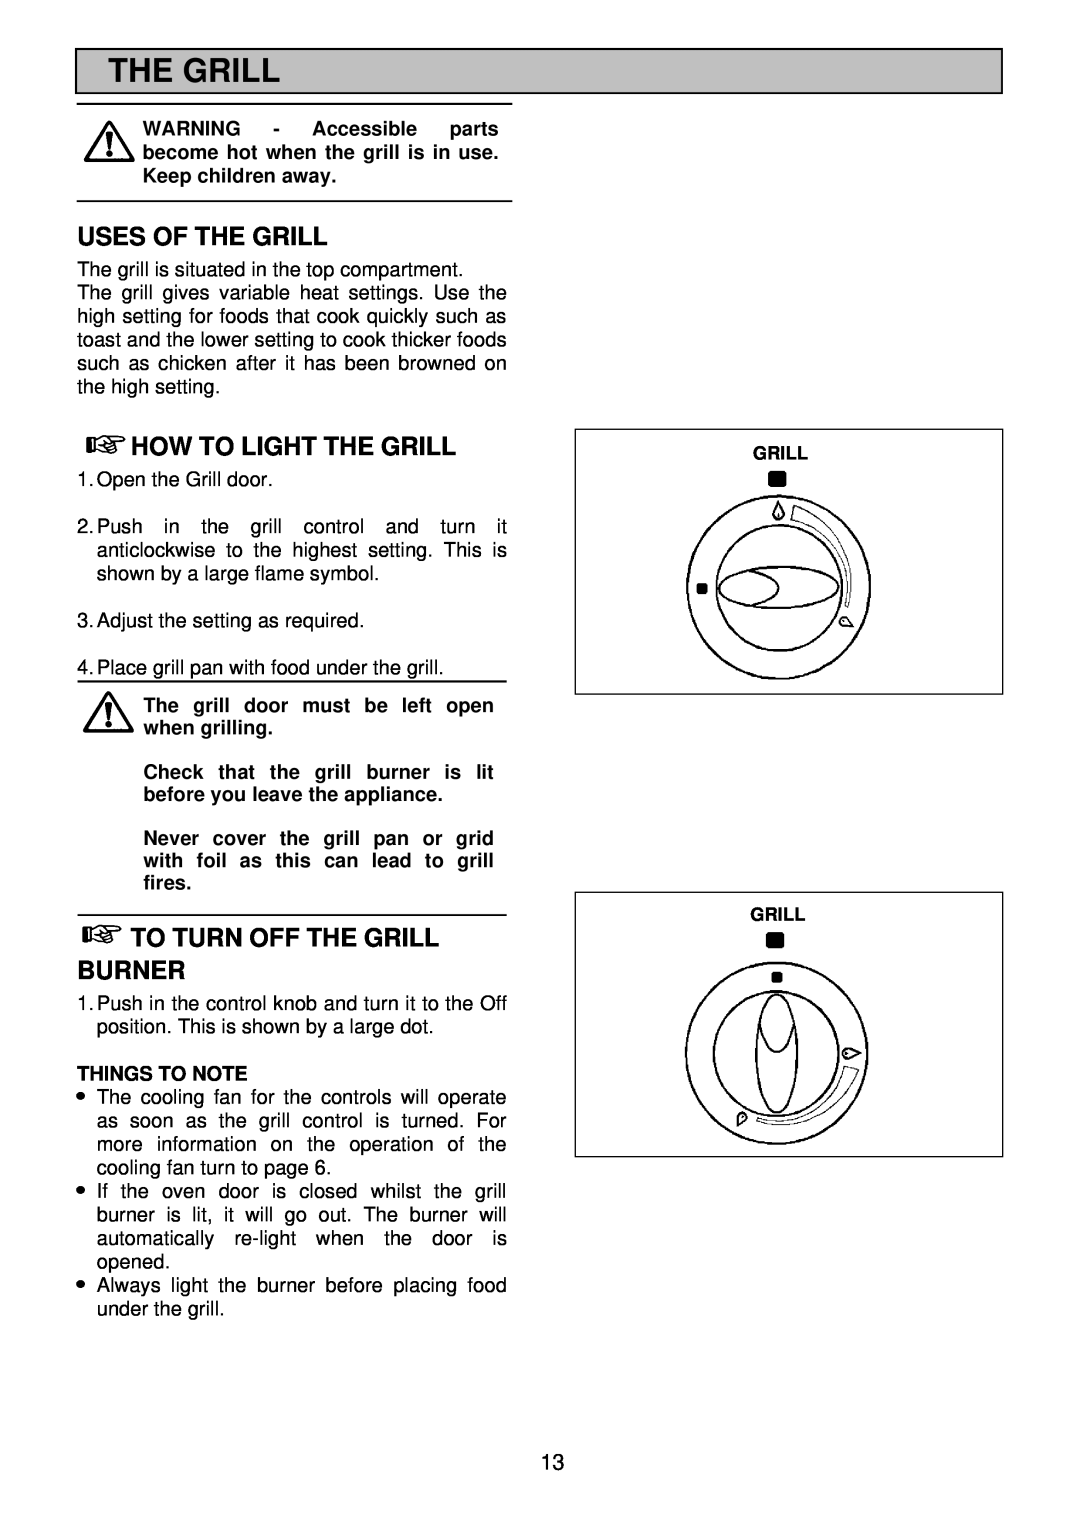 Electrolux EDB 872 manual Uses Of The Grill, How To Light The Grill, To Turn Off The Grill Burner, Things To Note 